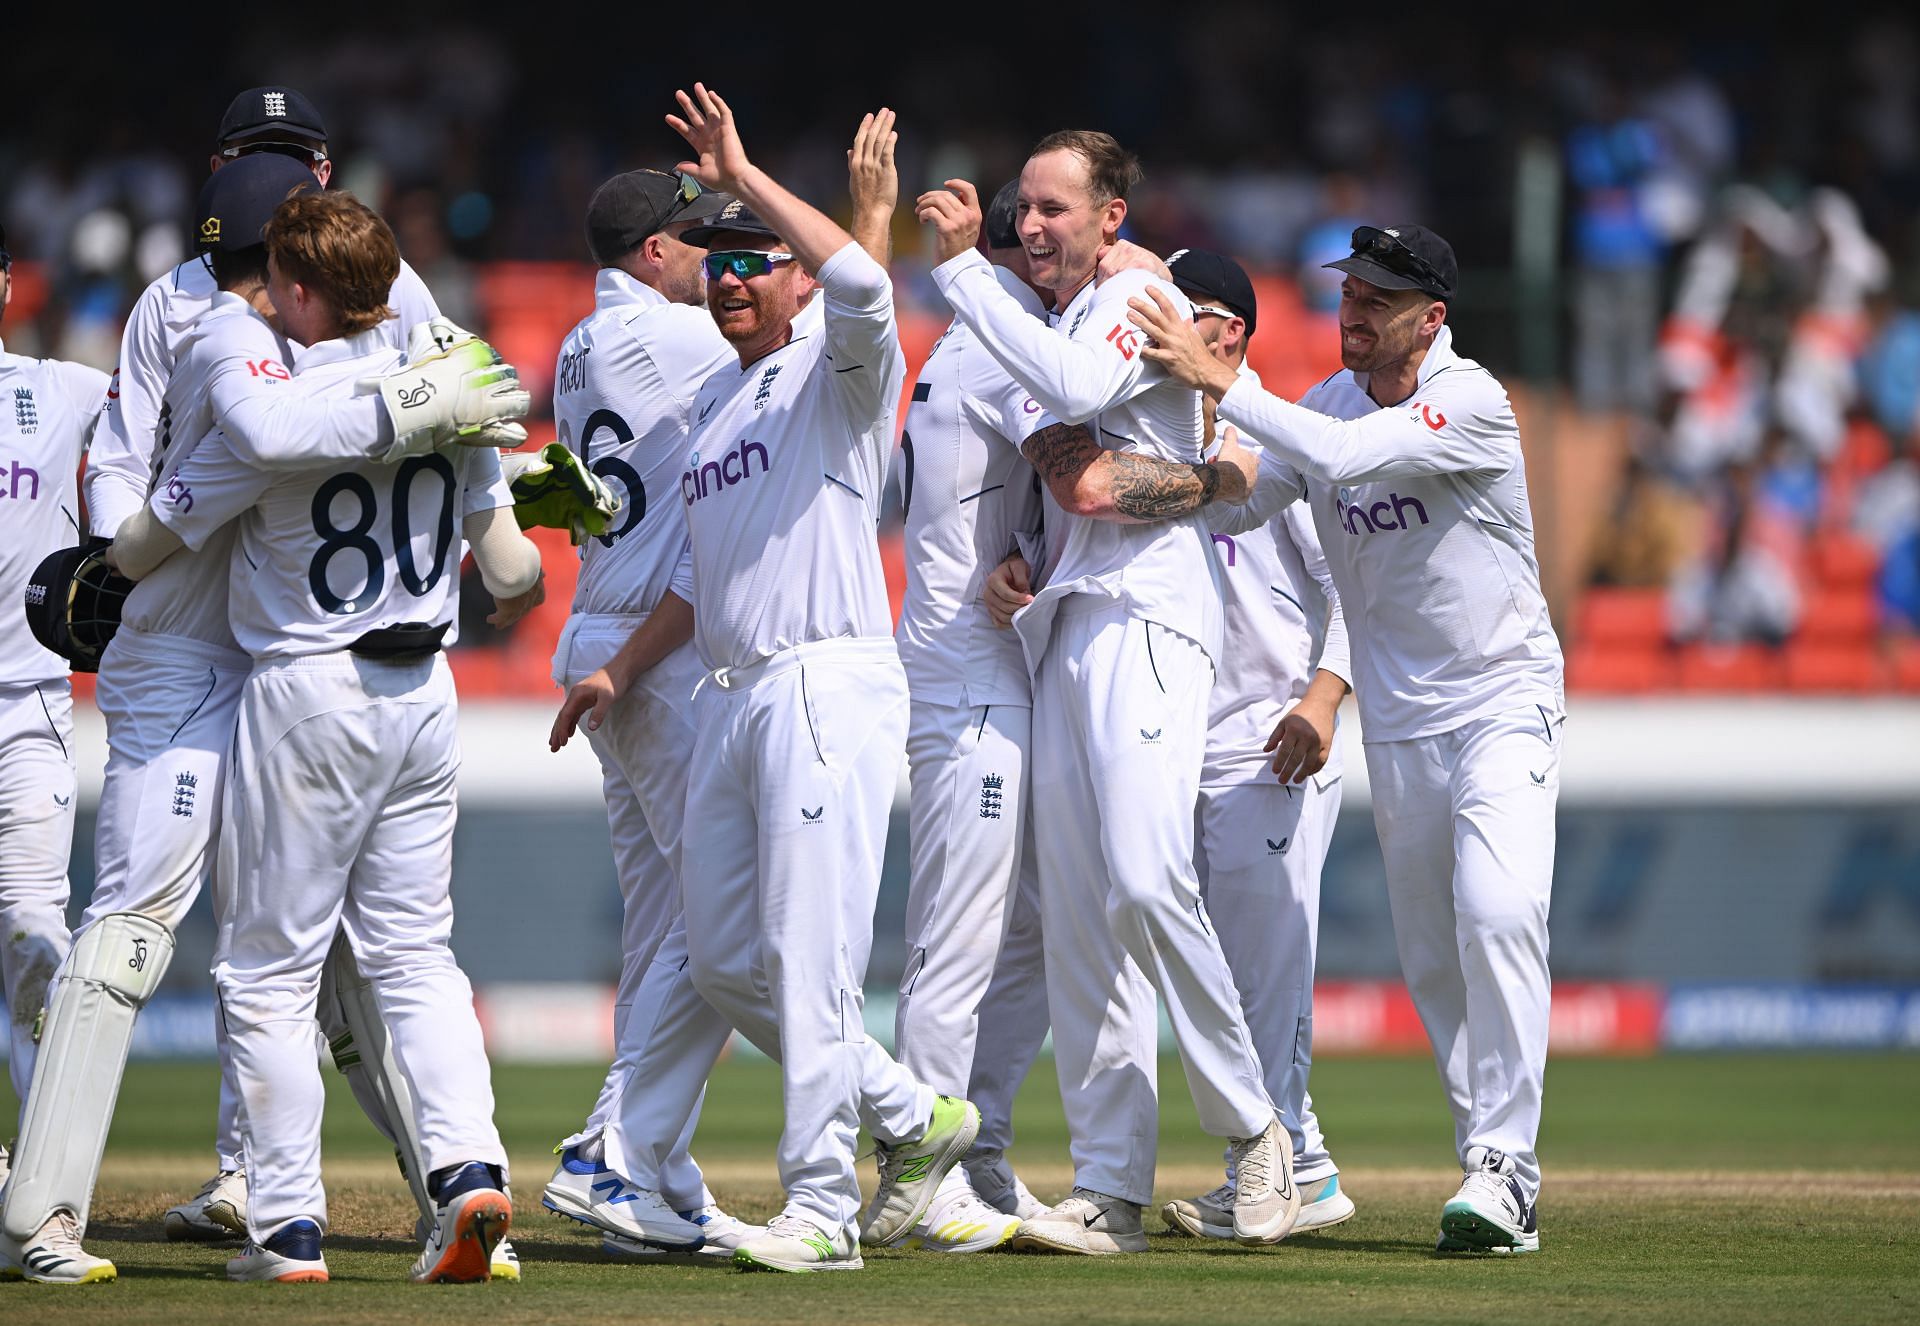 England players celebrating a wicket in Hyderabad. (Pic: Getty Images)